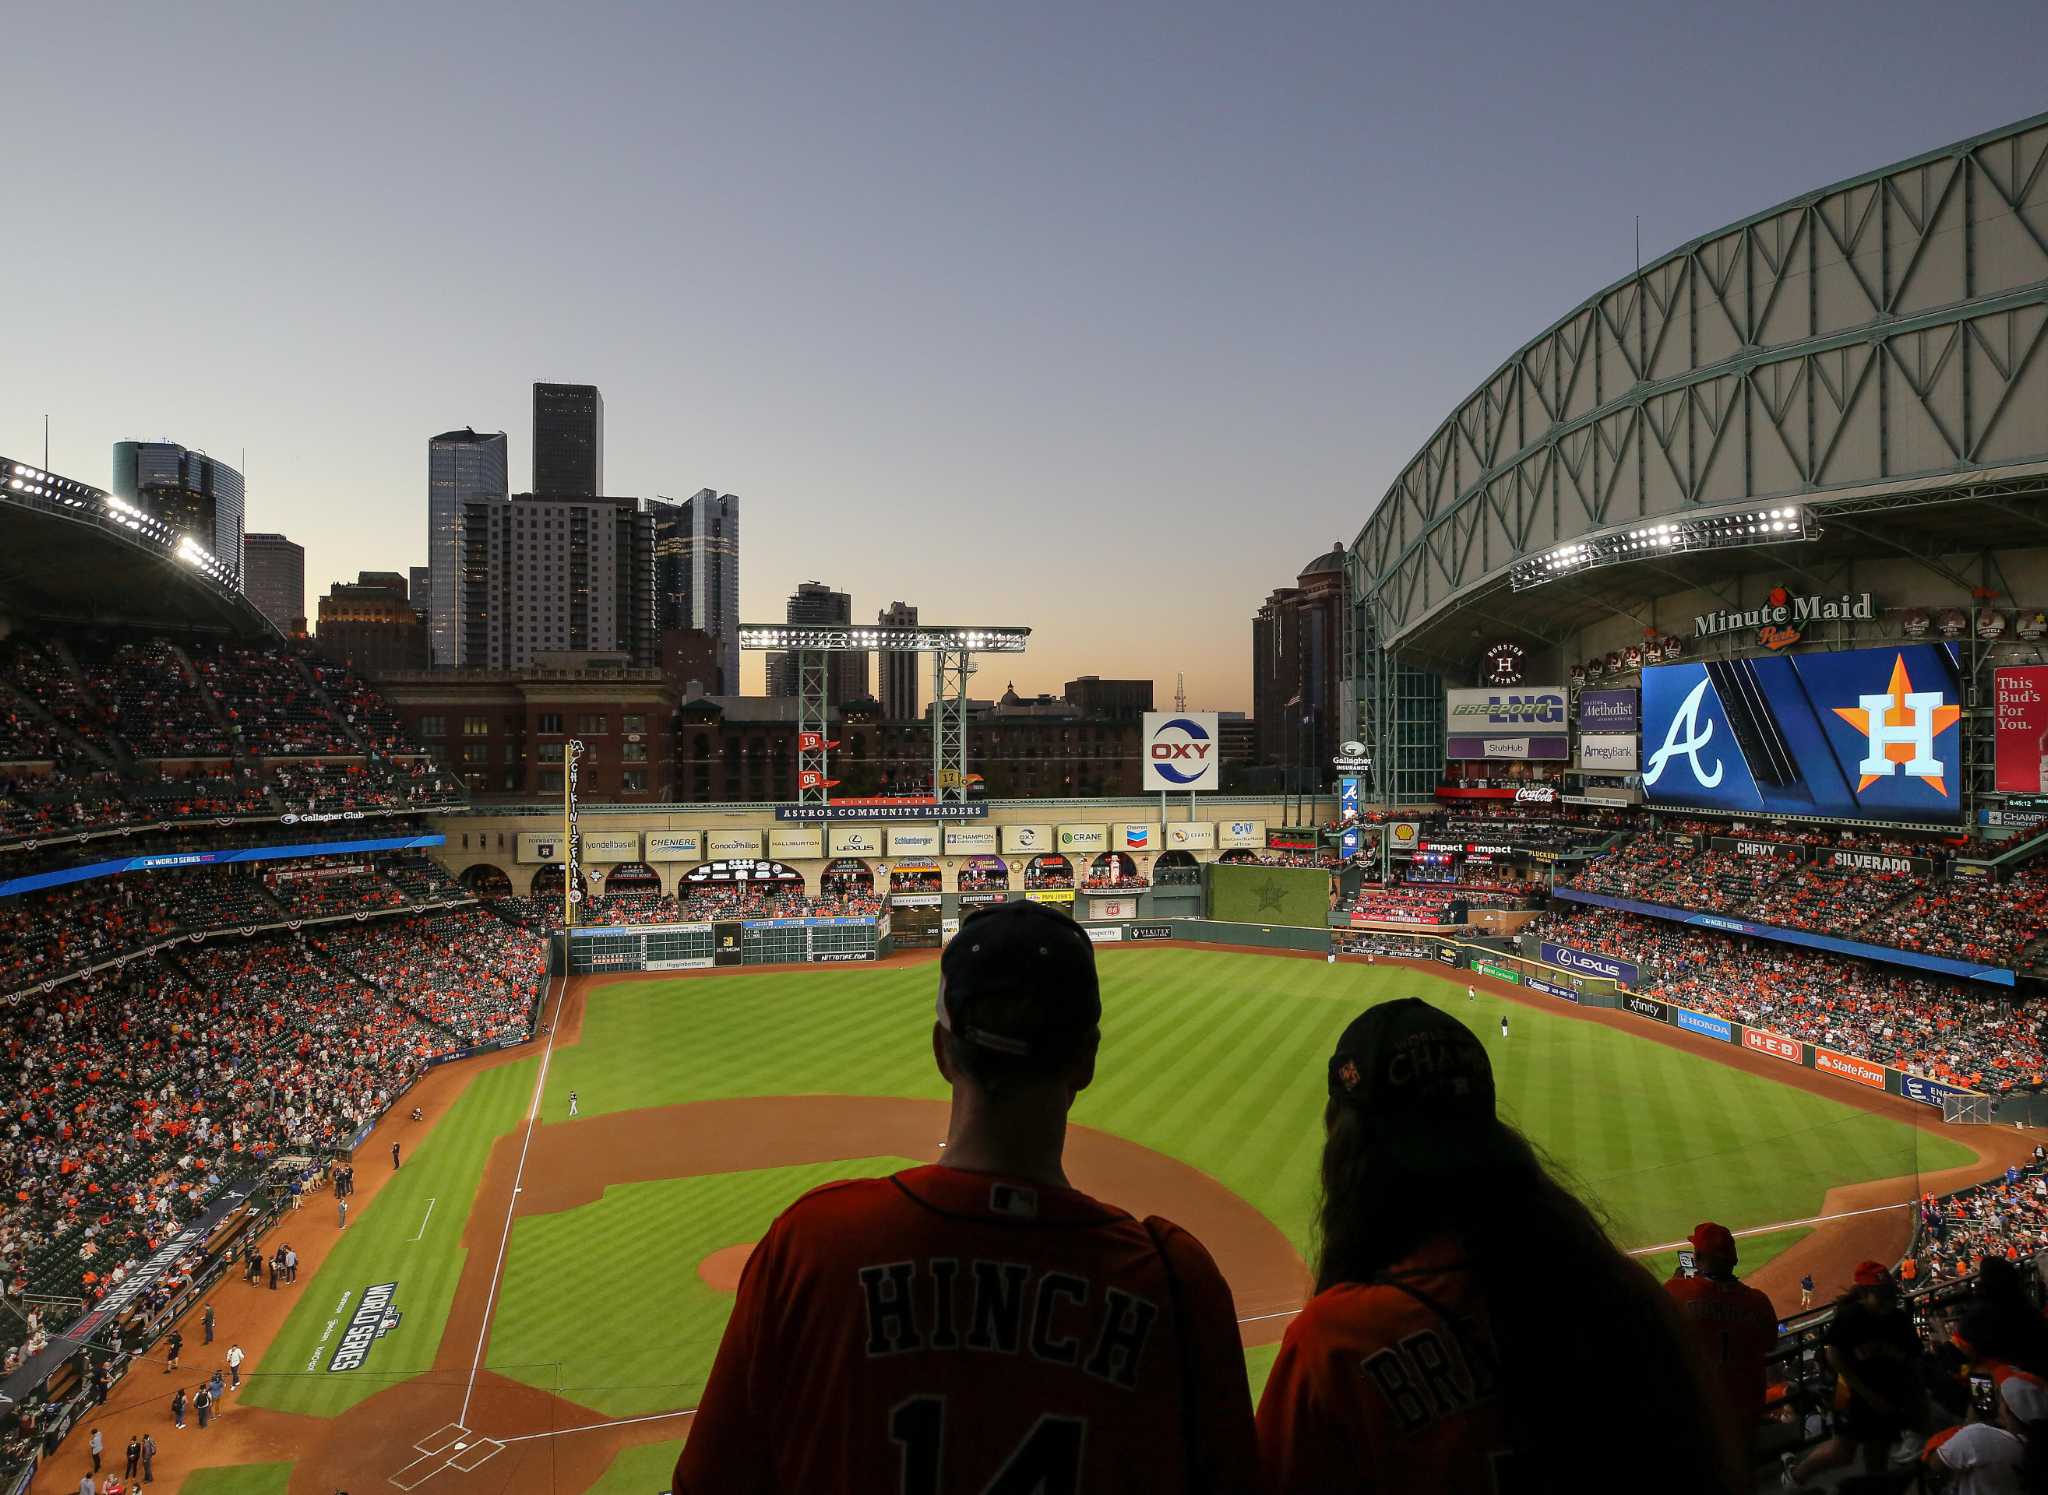 Minute Maid Park will be home to MLB's first  Just Walk Out